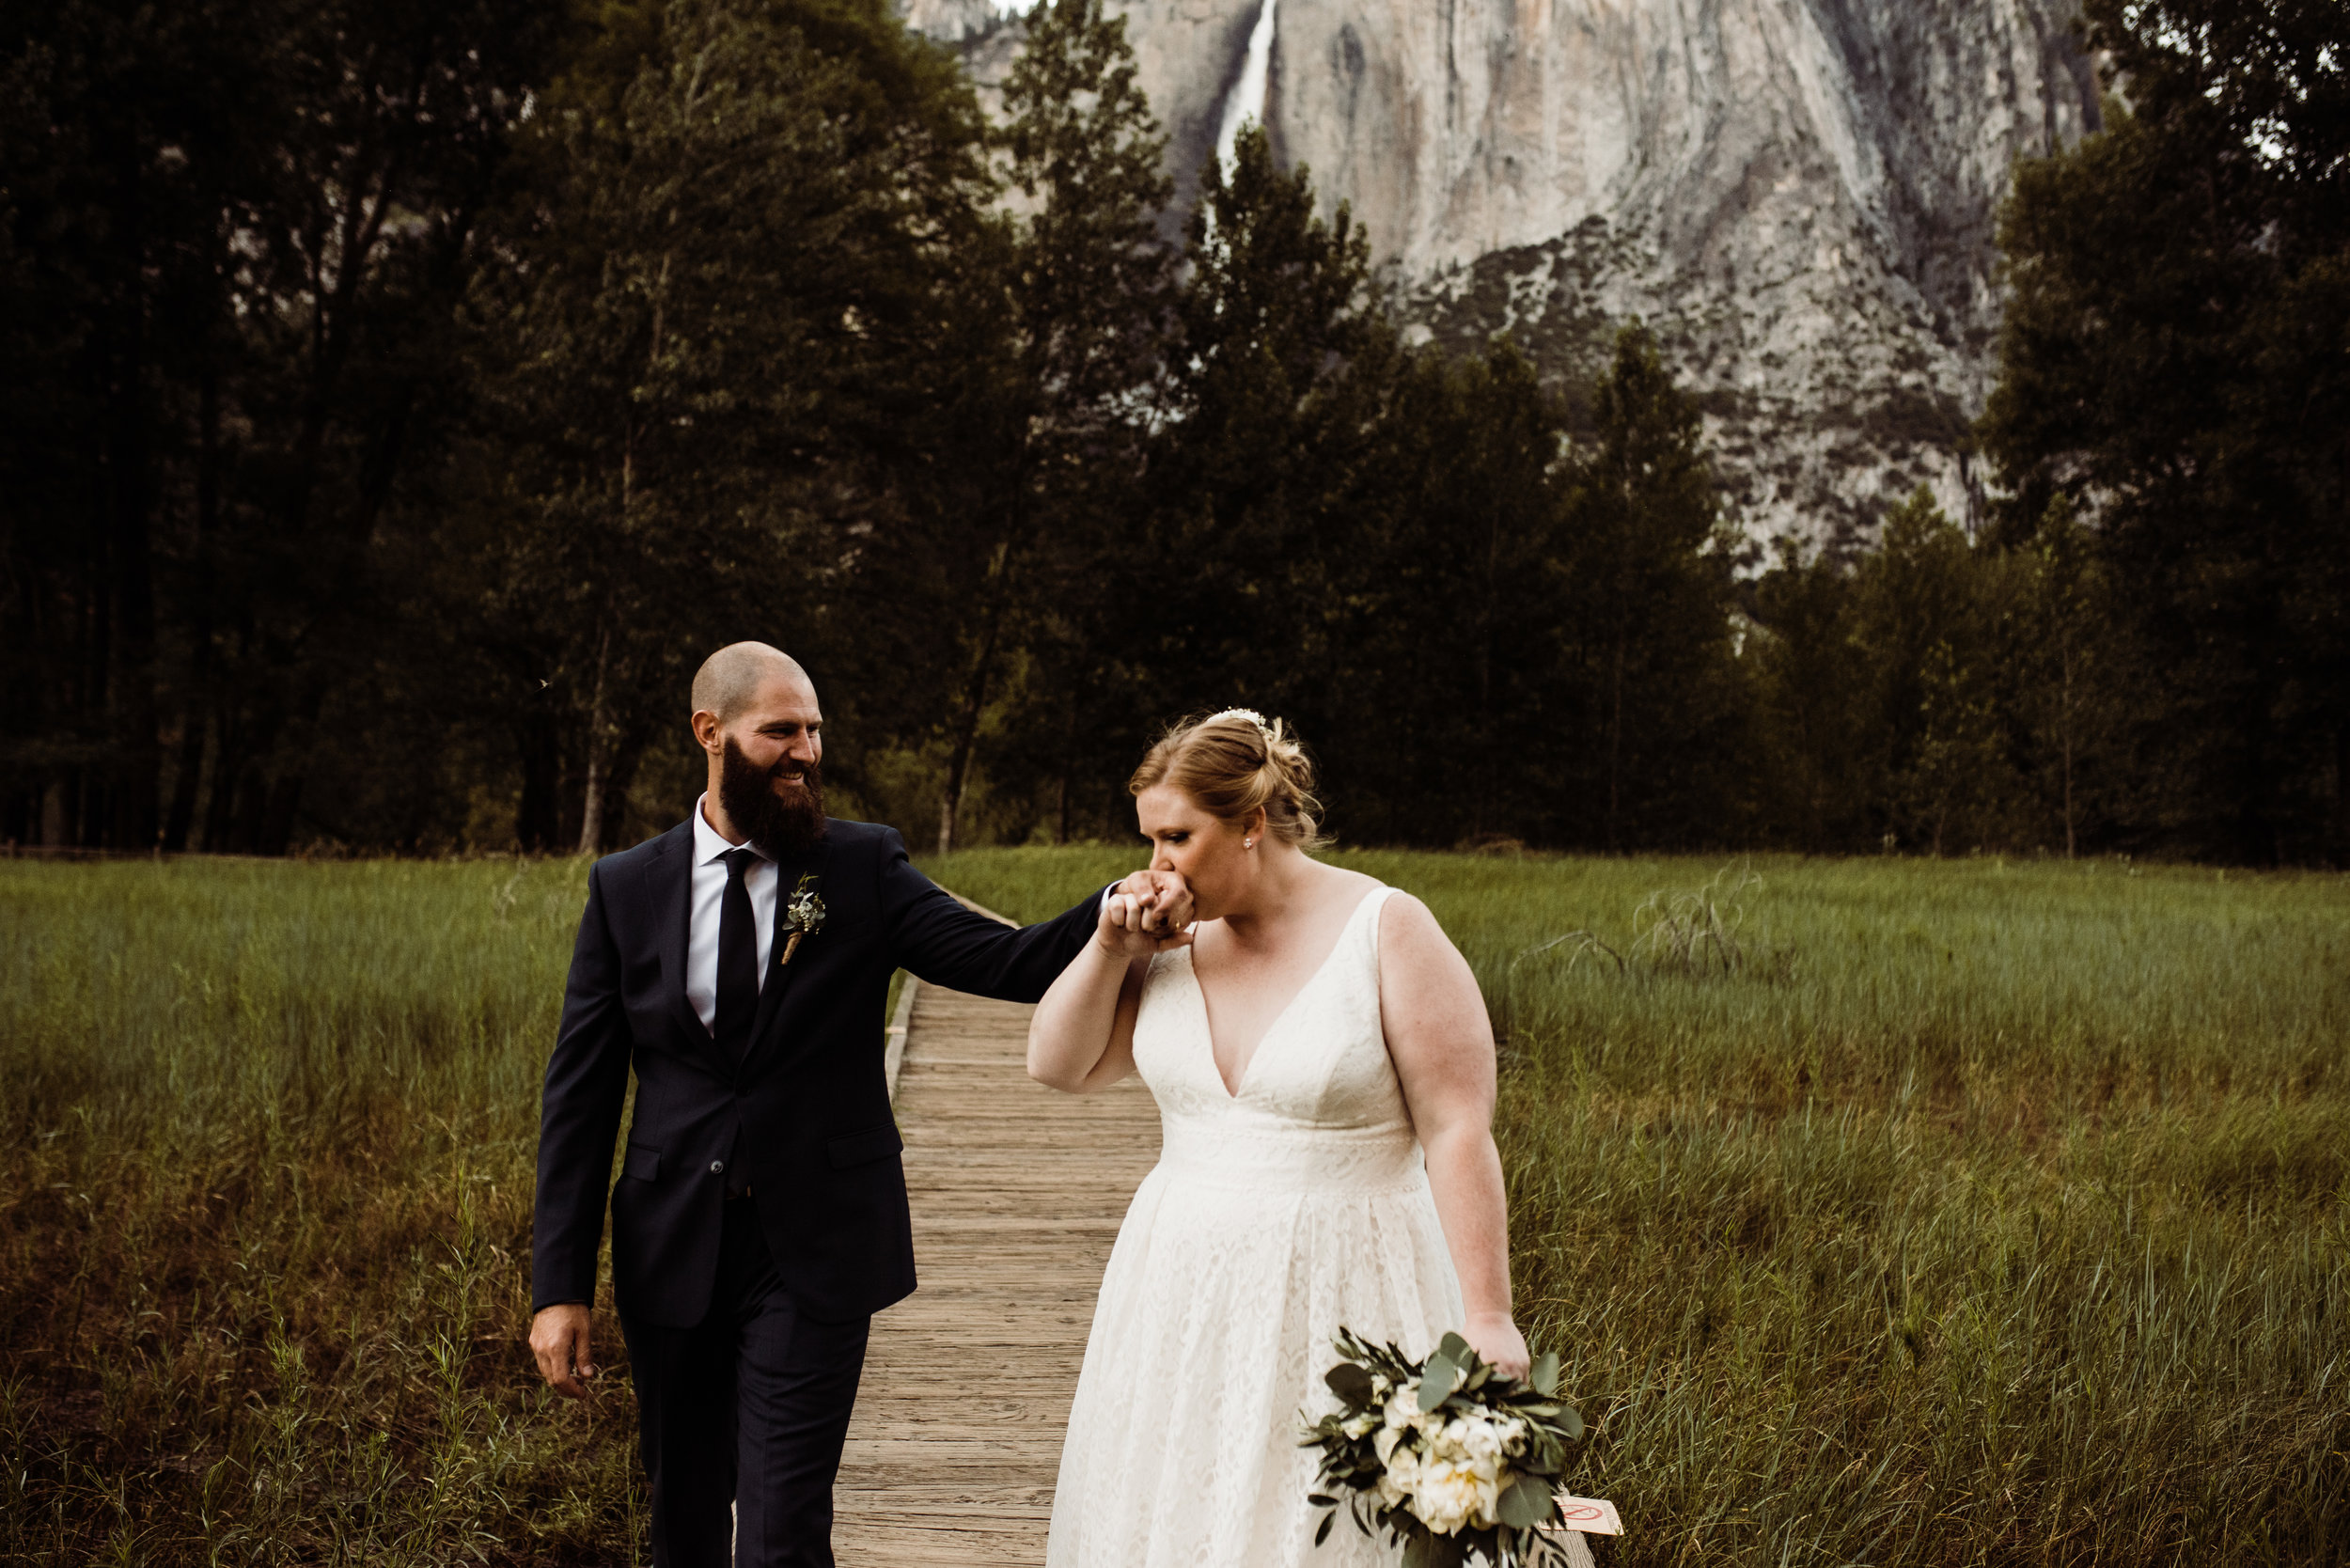 Romantic moment with bride and groom in Yosemite Valley